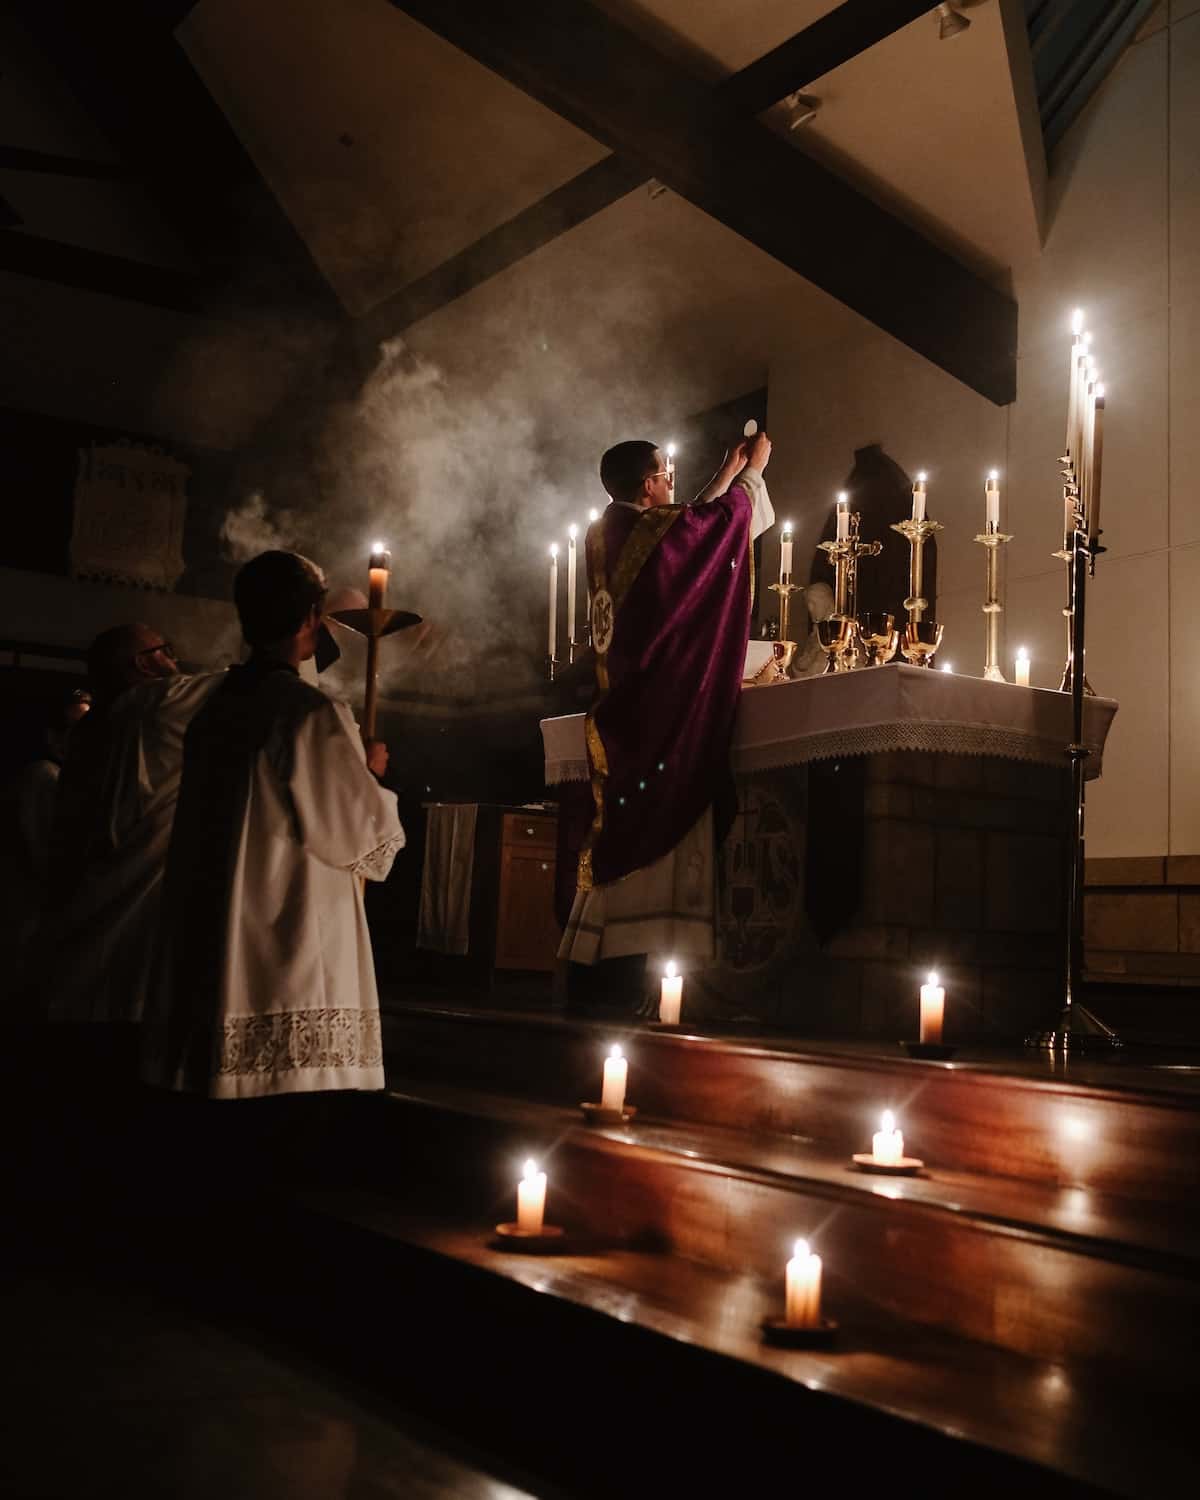 A priest celebrating mass in a church lit with many candles